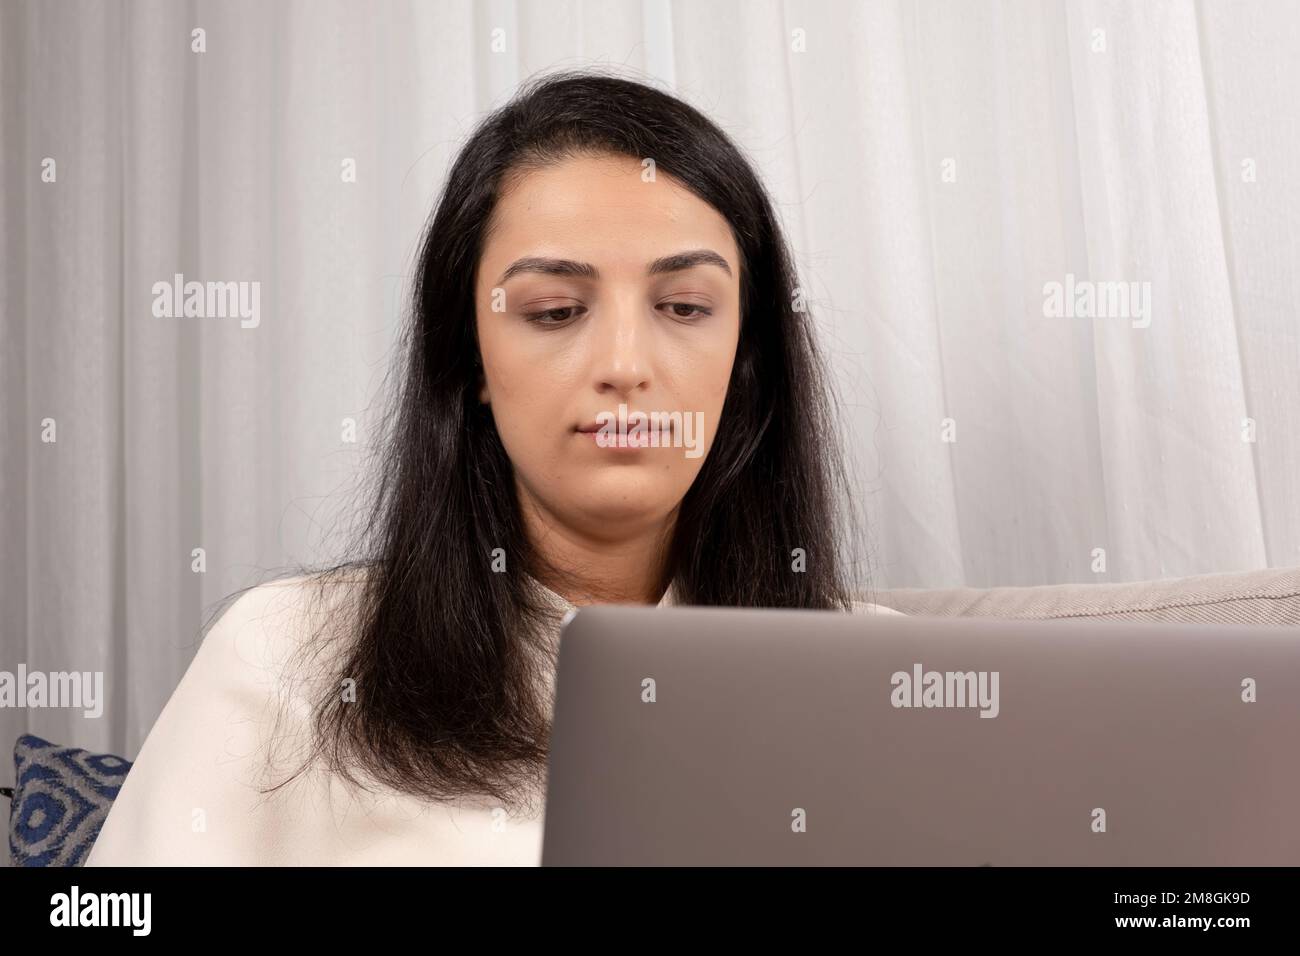 Woman using laptop. Sitting on couch at home. Shopping, chatting, working, online in social media, watching movie, freelancer, computer coding. Stock Photo